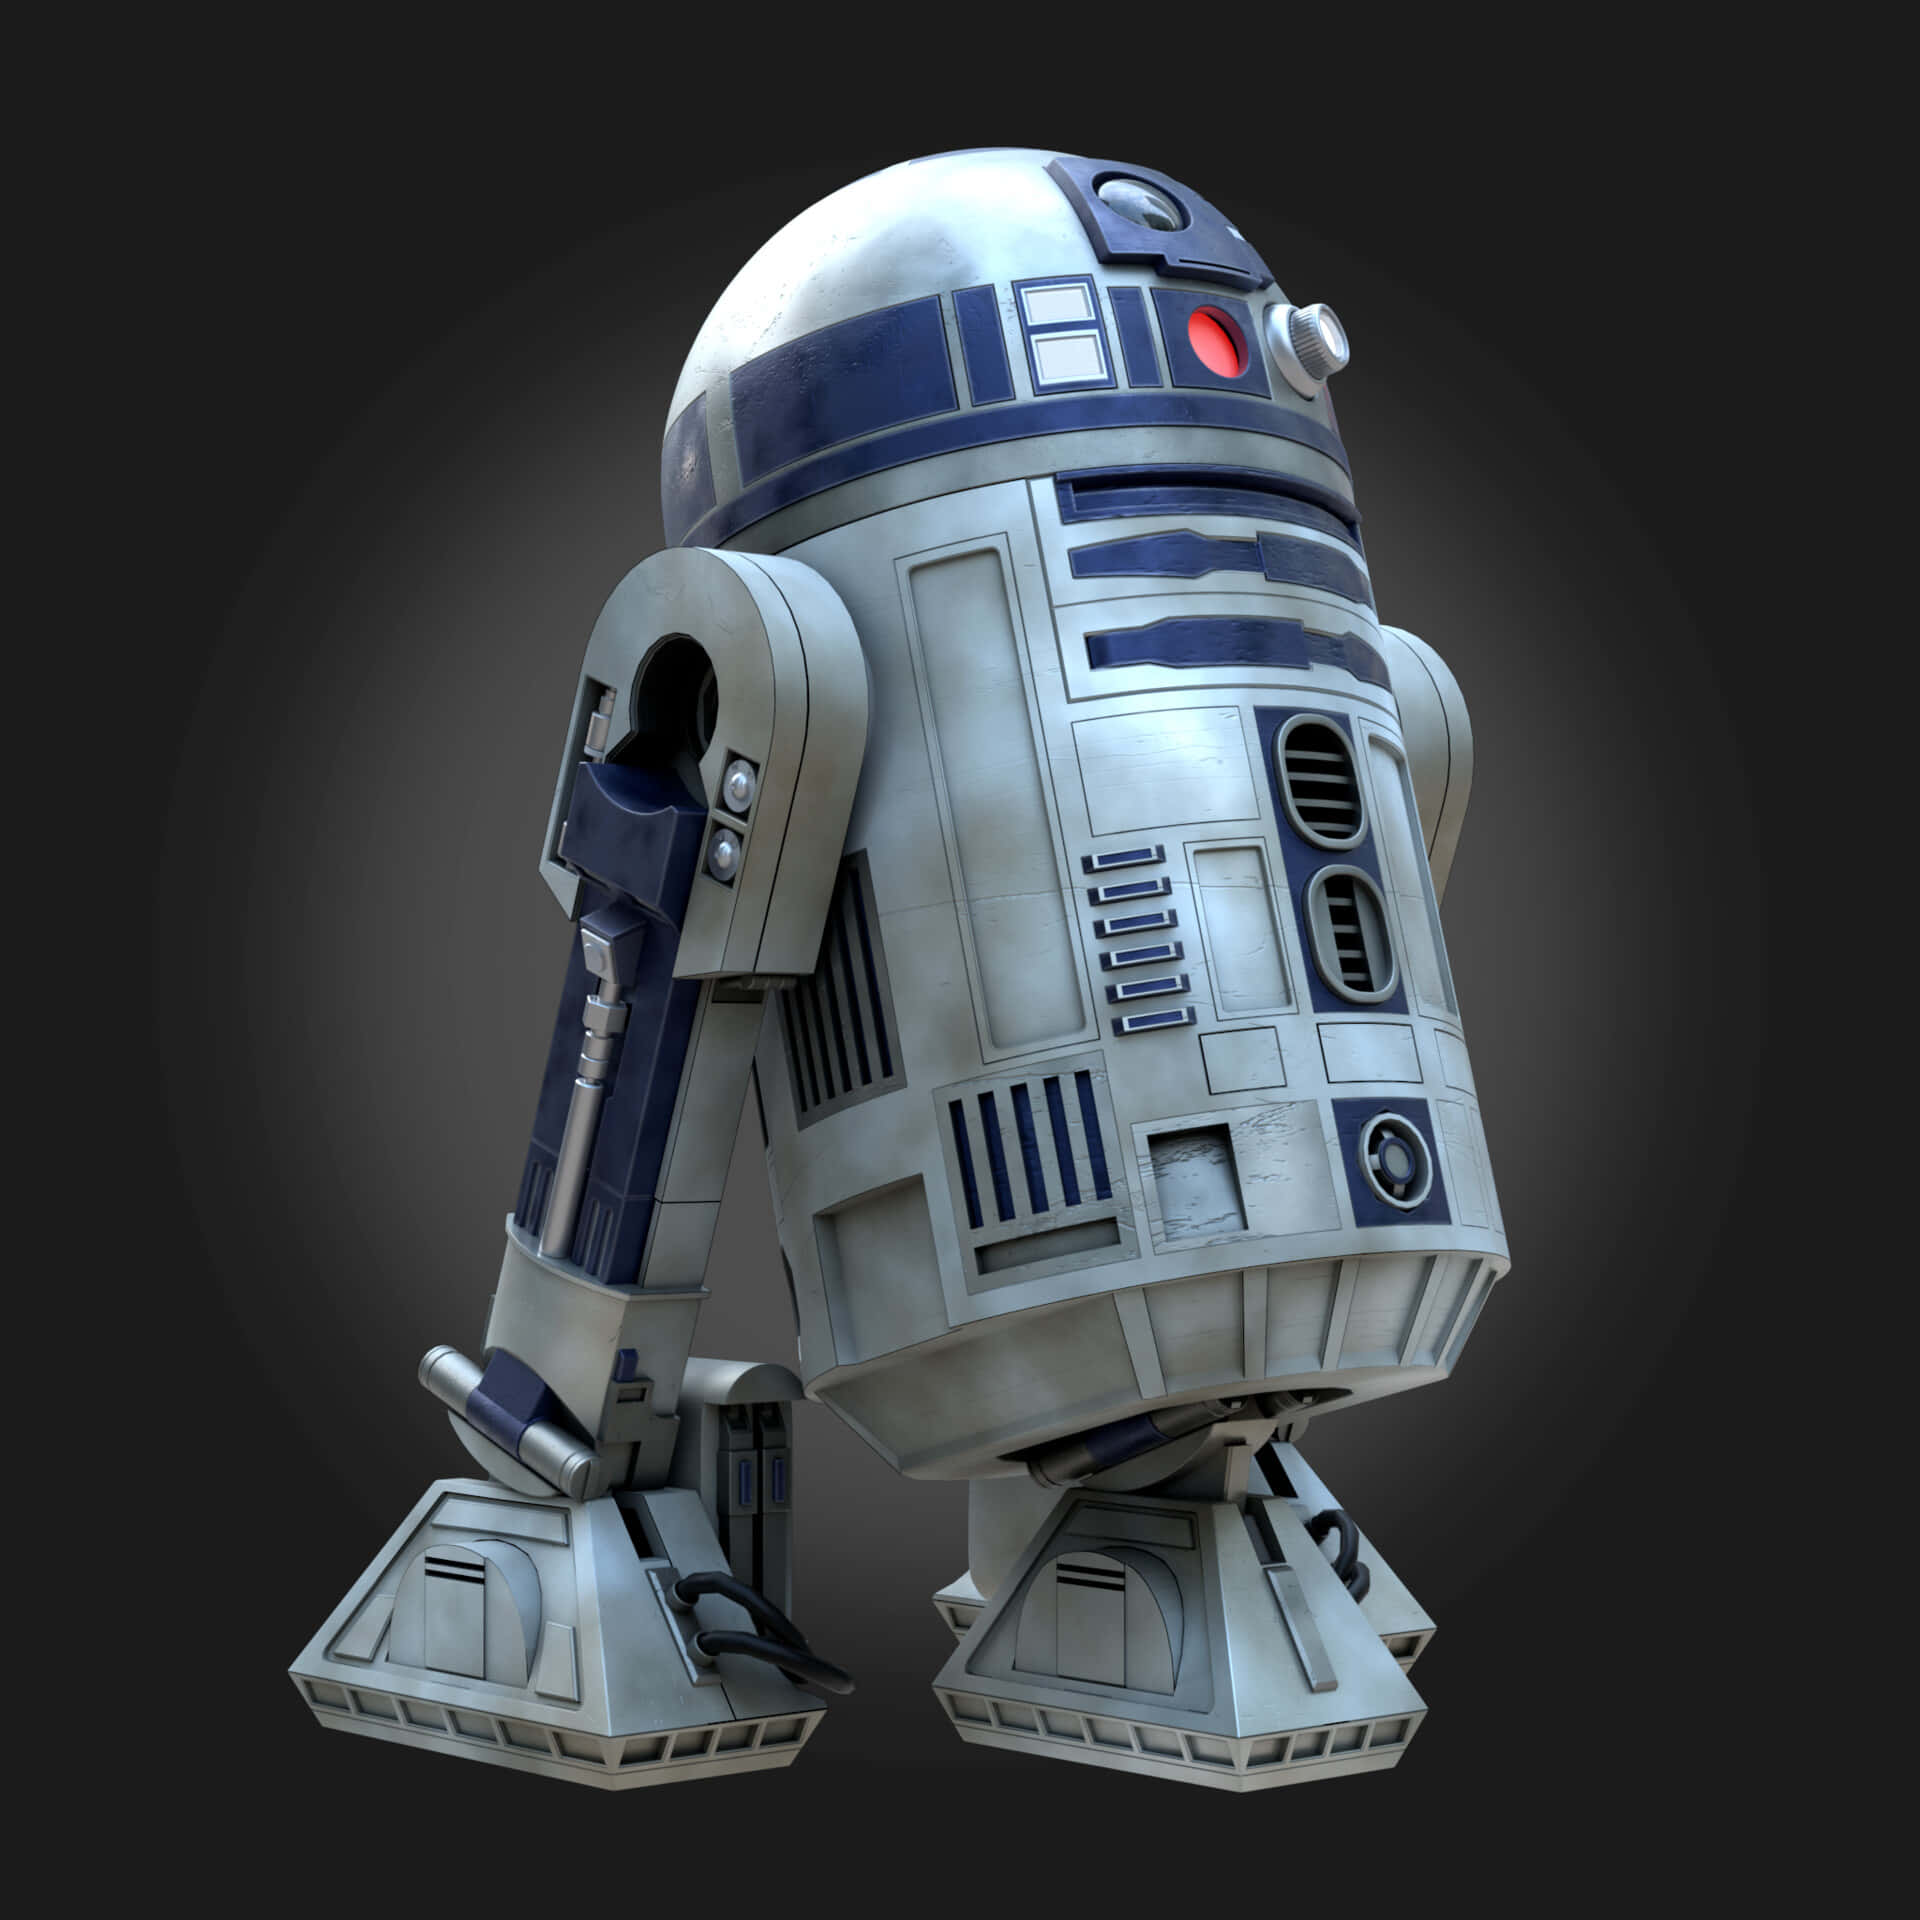 R2-D2 from Star Wars Franchise Wallpaper